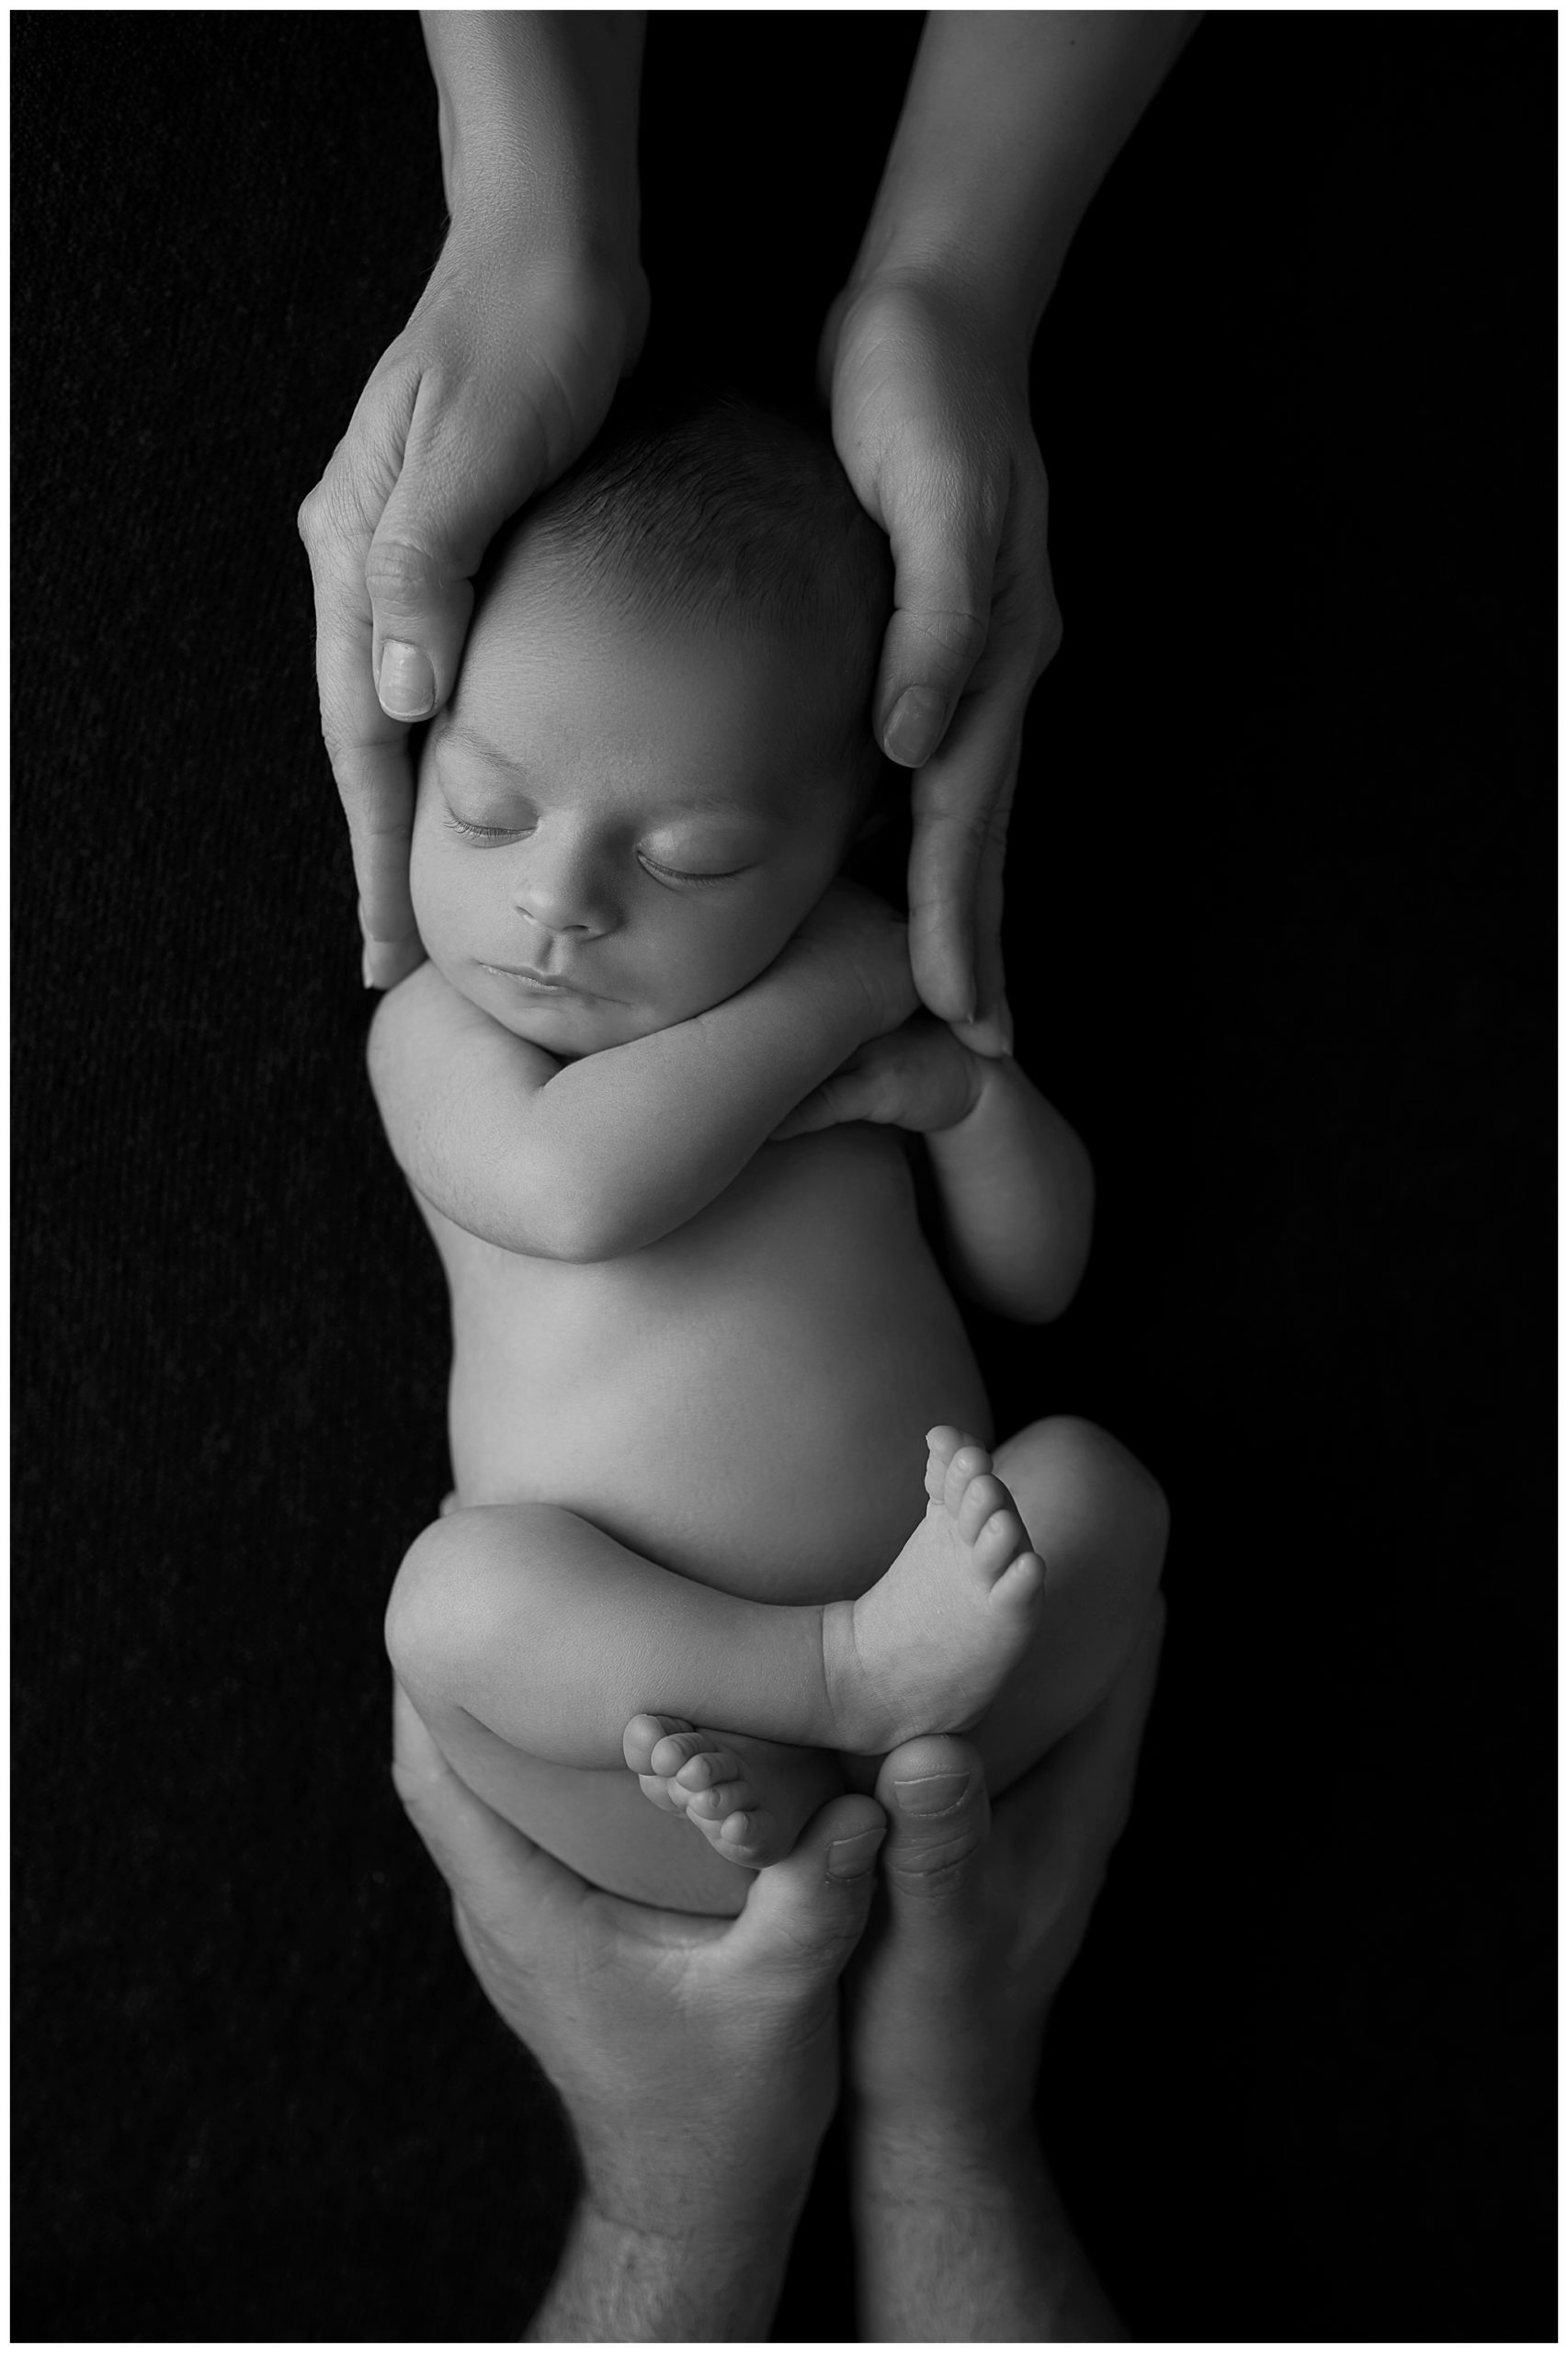 sleeping baby held by mom and dad hands